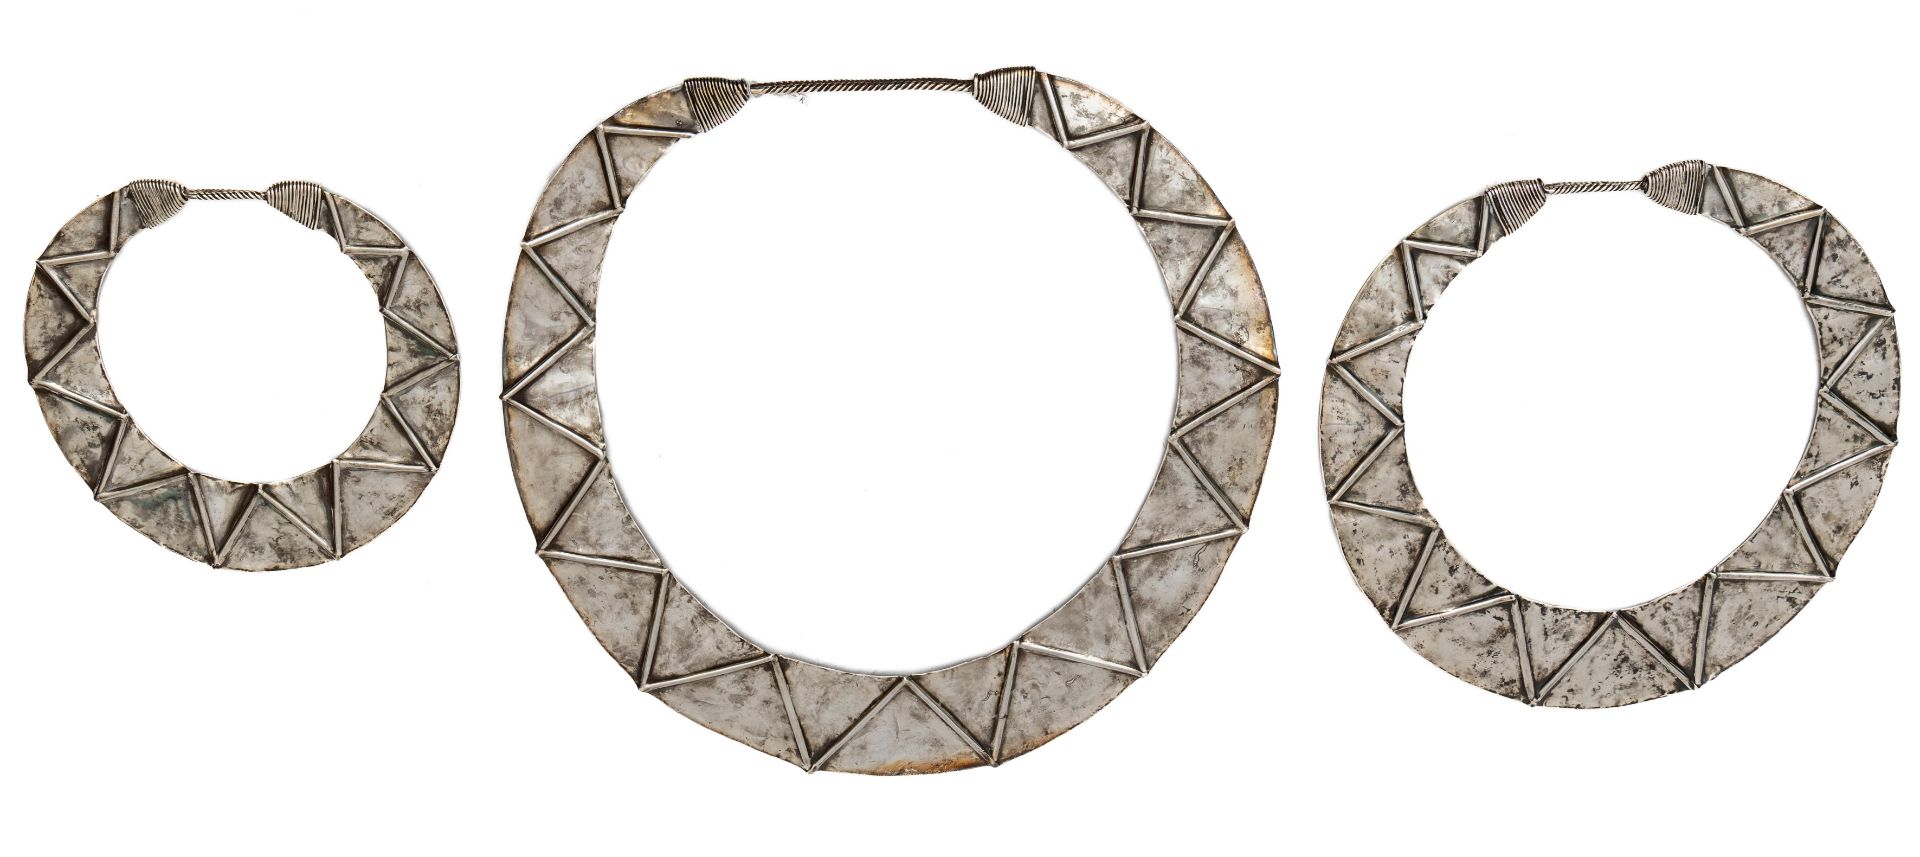 China, Guizhou, Miao, Jianhe area, a silver alloy necklace in three separate broad bands;